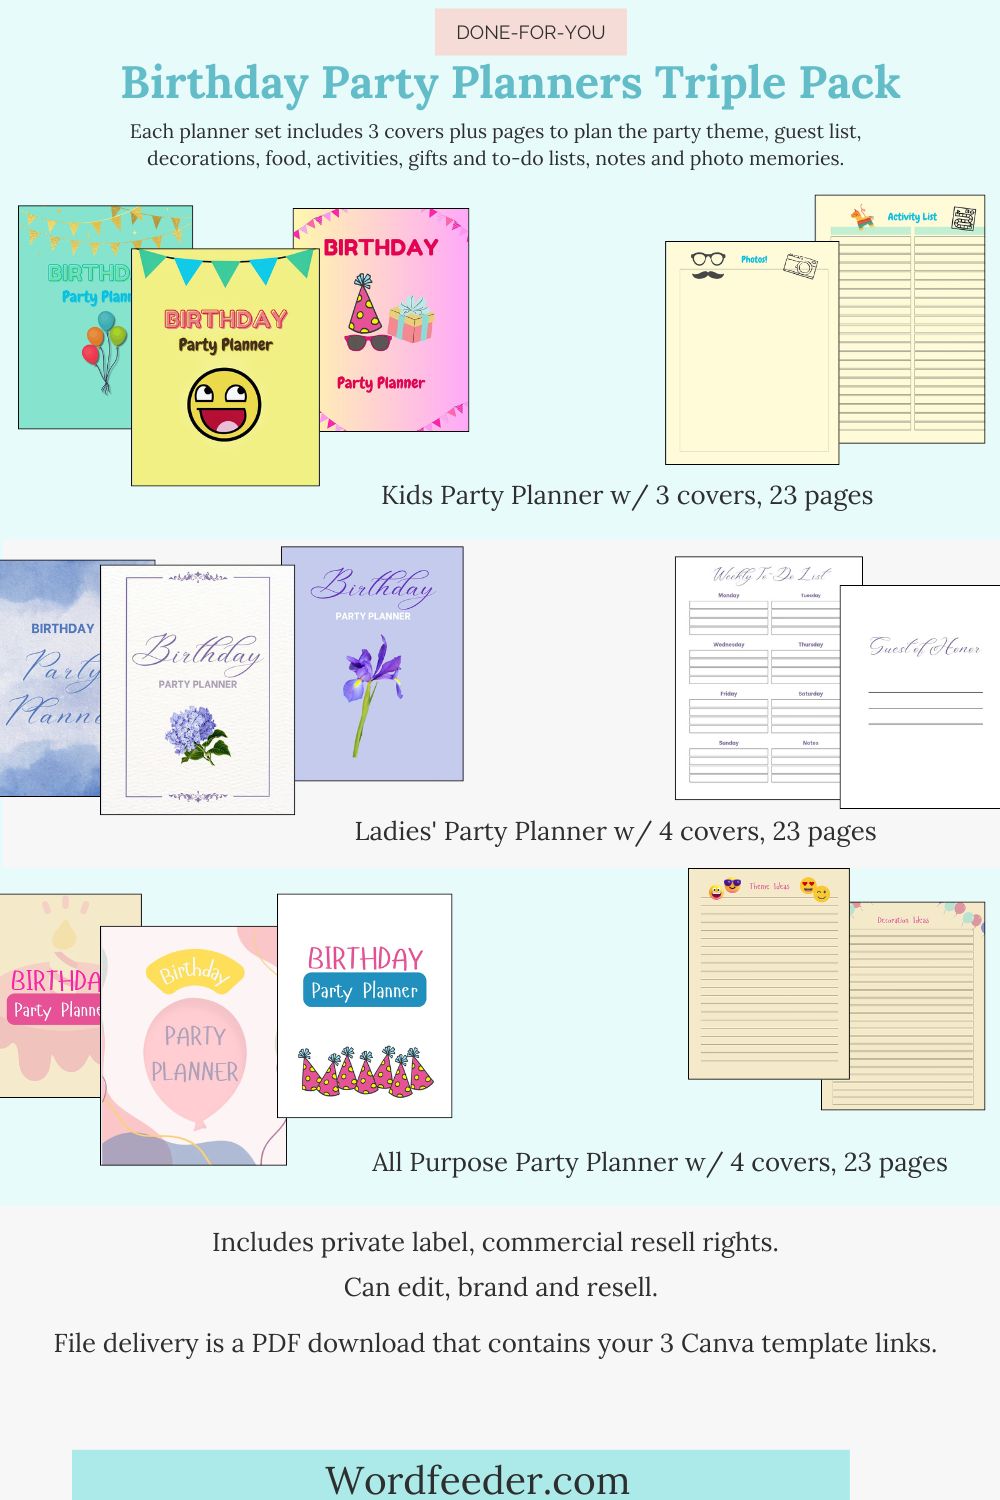 Birthday Party Planner Triple Pack. Each with 3 Covers and 23 Planner Pages Now on Sale!